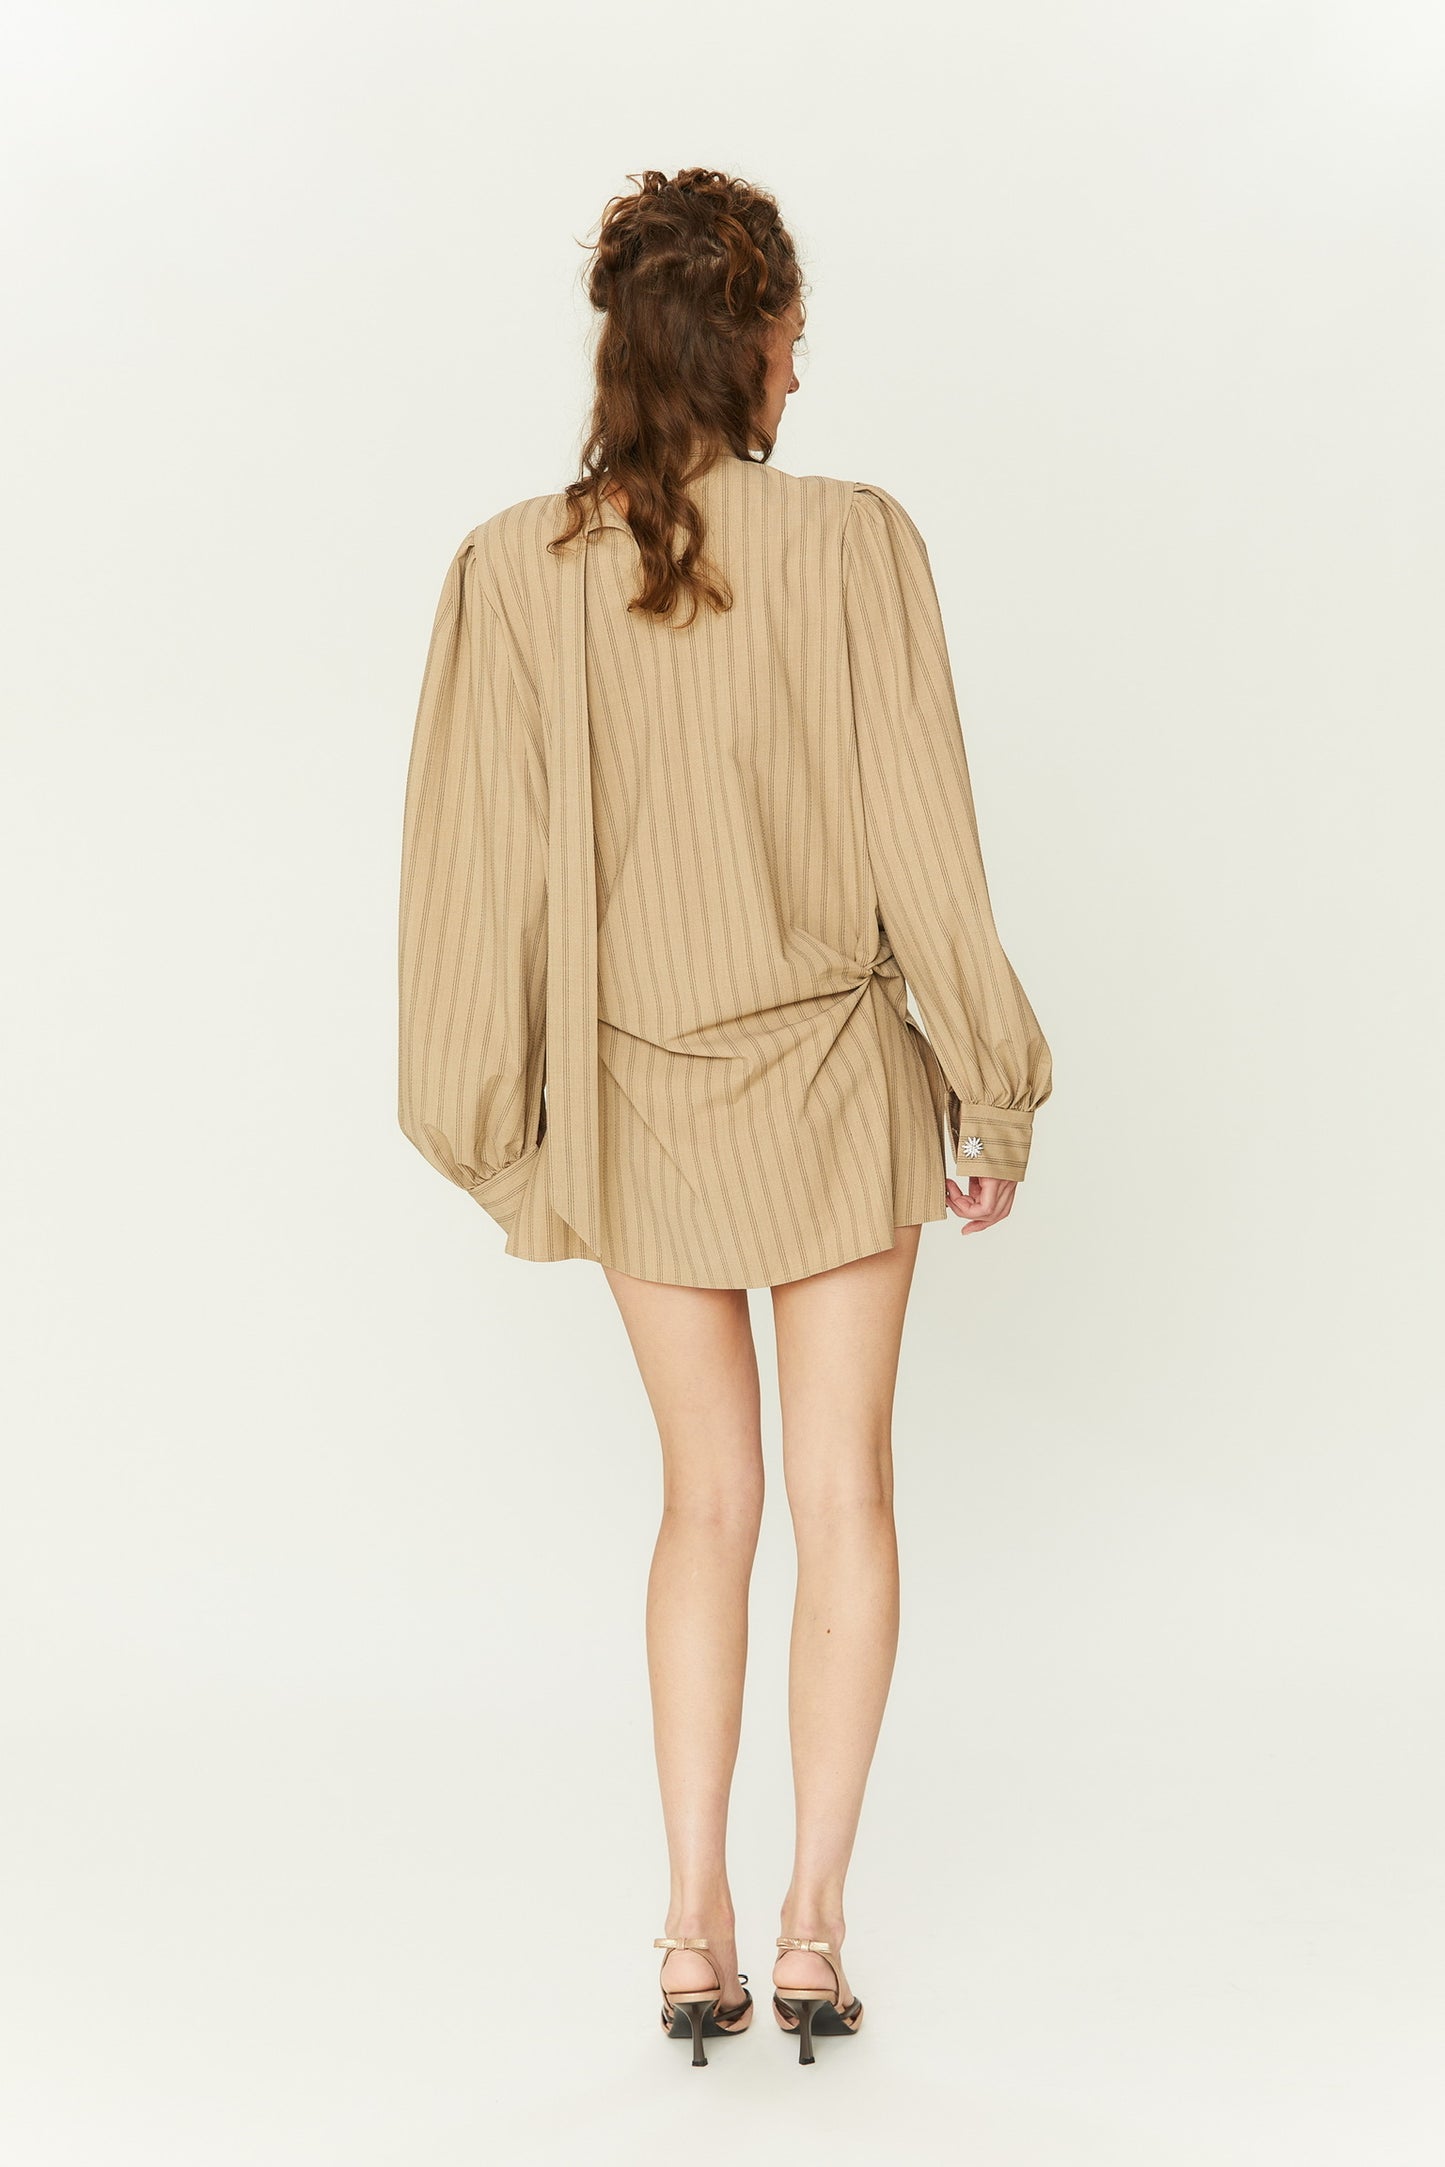 Flo Shirt Dress in Toffee